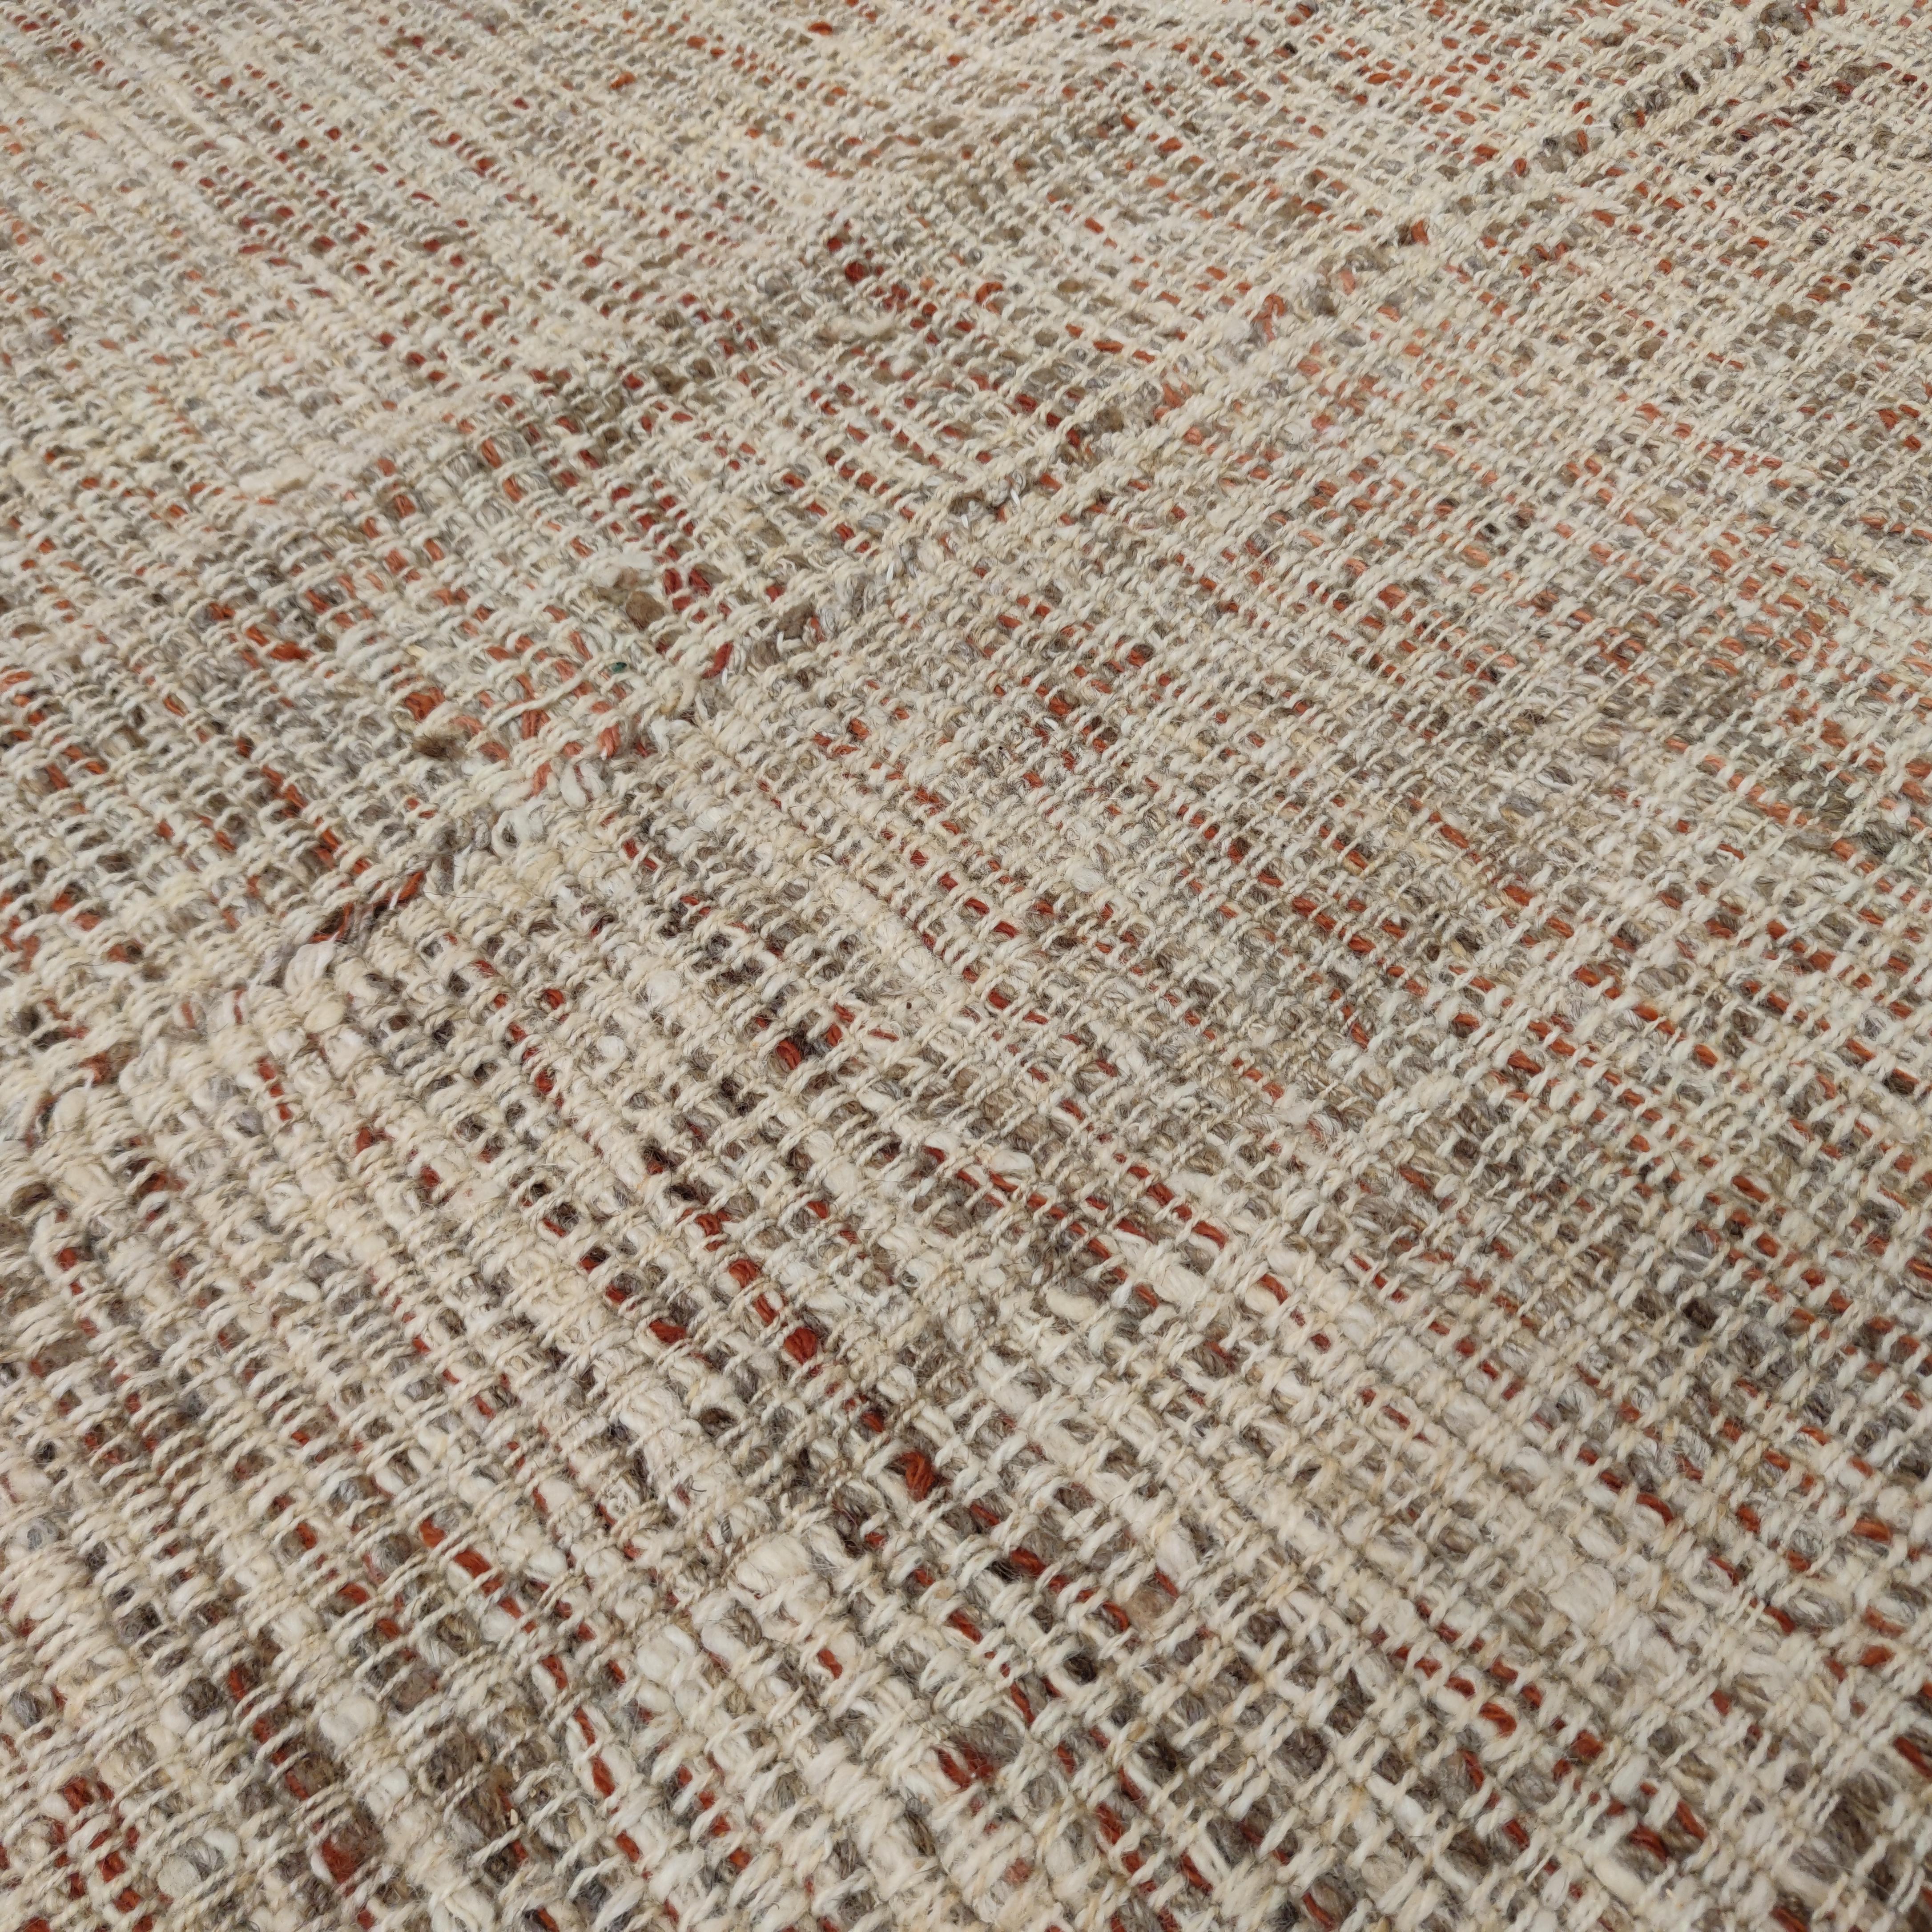 A rare and unusual room-size wool flat-weave, most probably commissioned for the European market during the post-war years, distinguished by a textural interlace of wool threads in neutral shades alternated to touches of burgundy red wool. The end